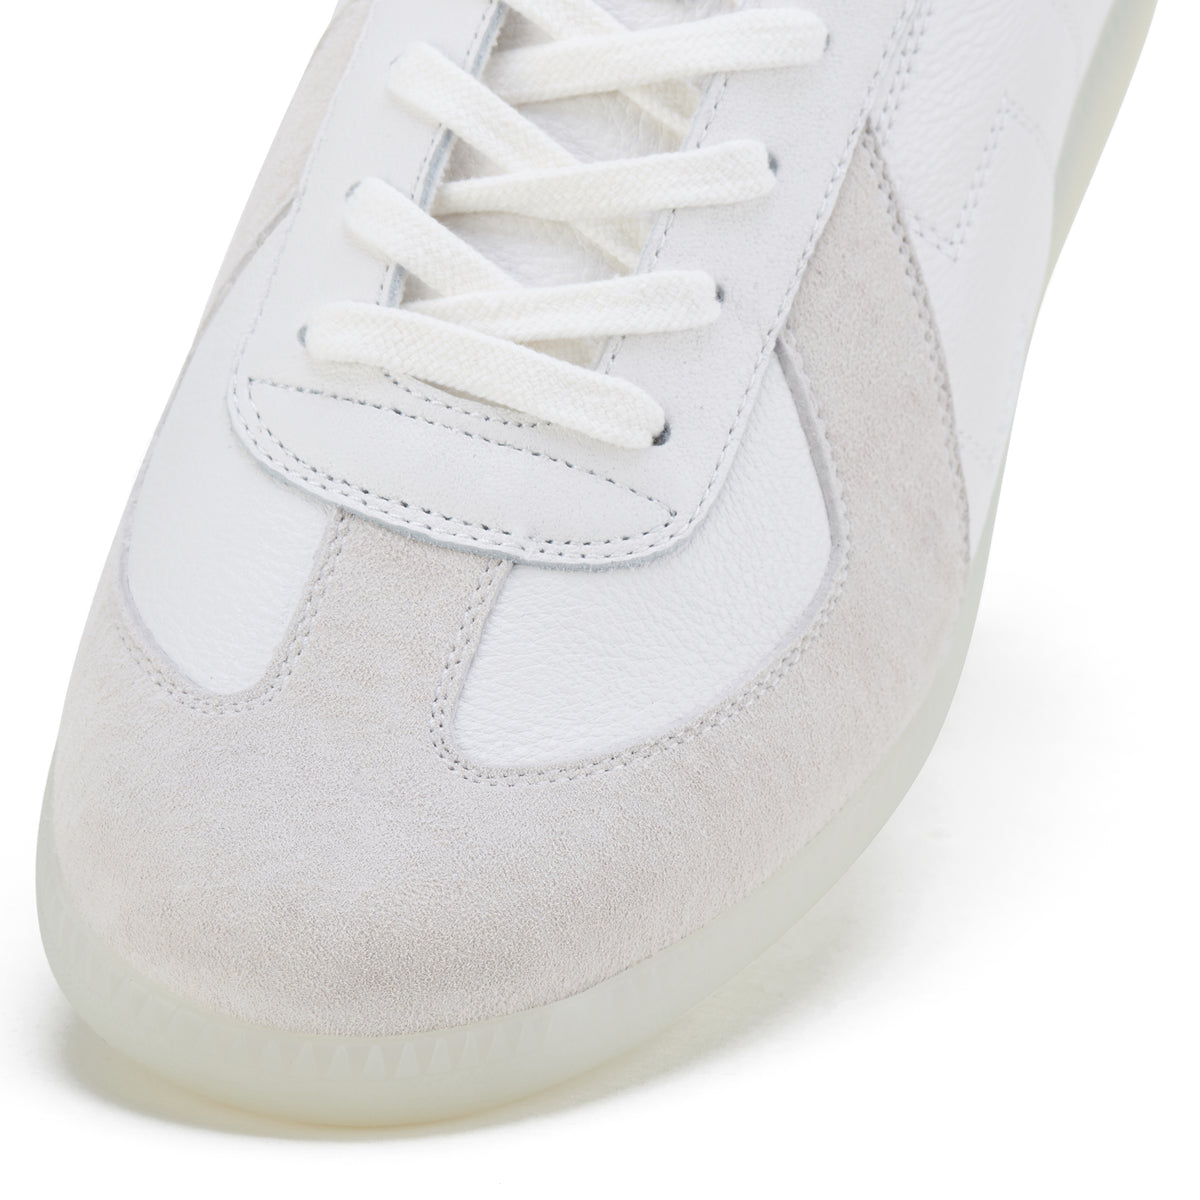 Pace Mens All White/Clear